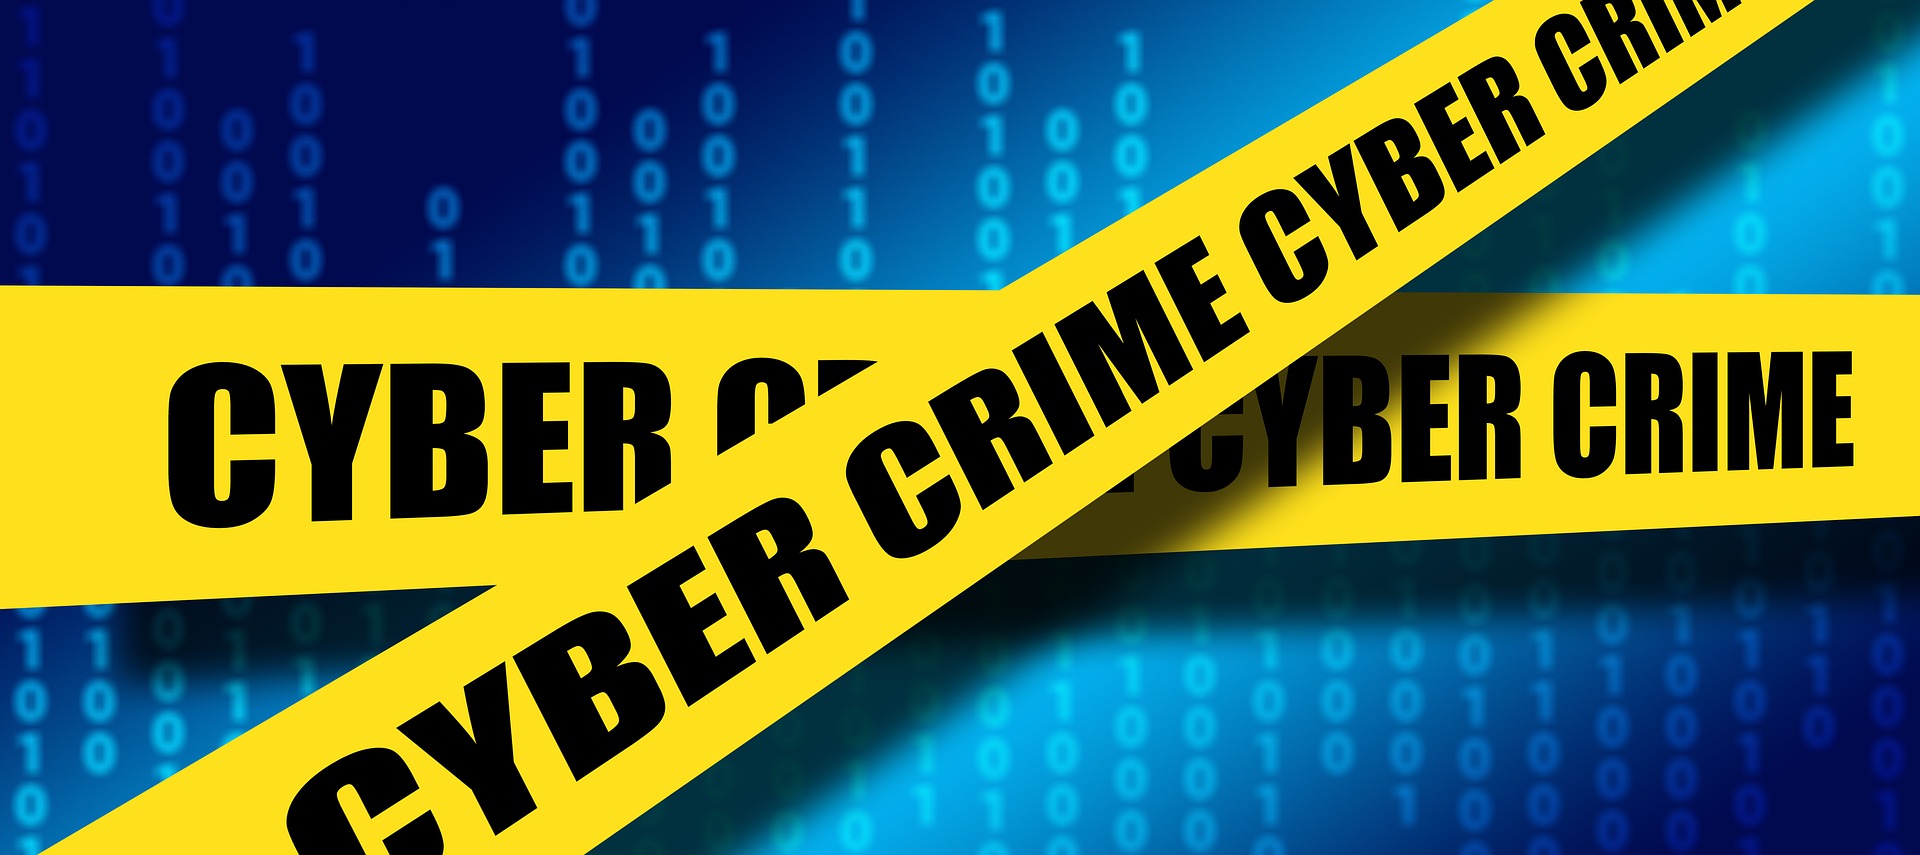 Cyber Security & Network Security